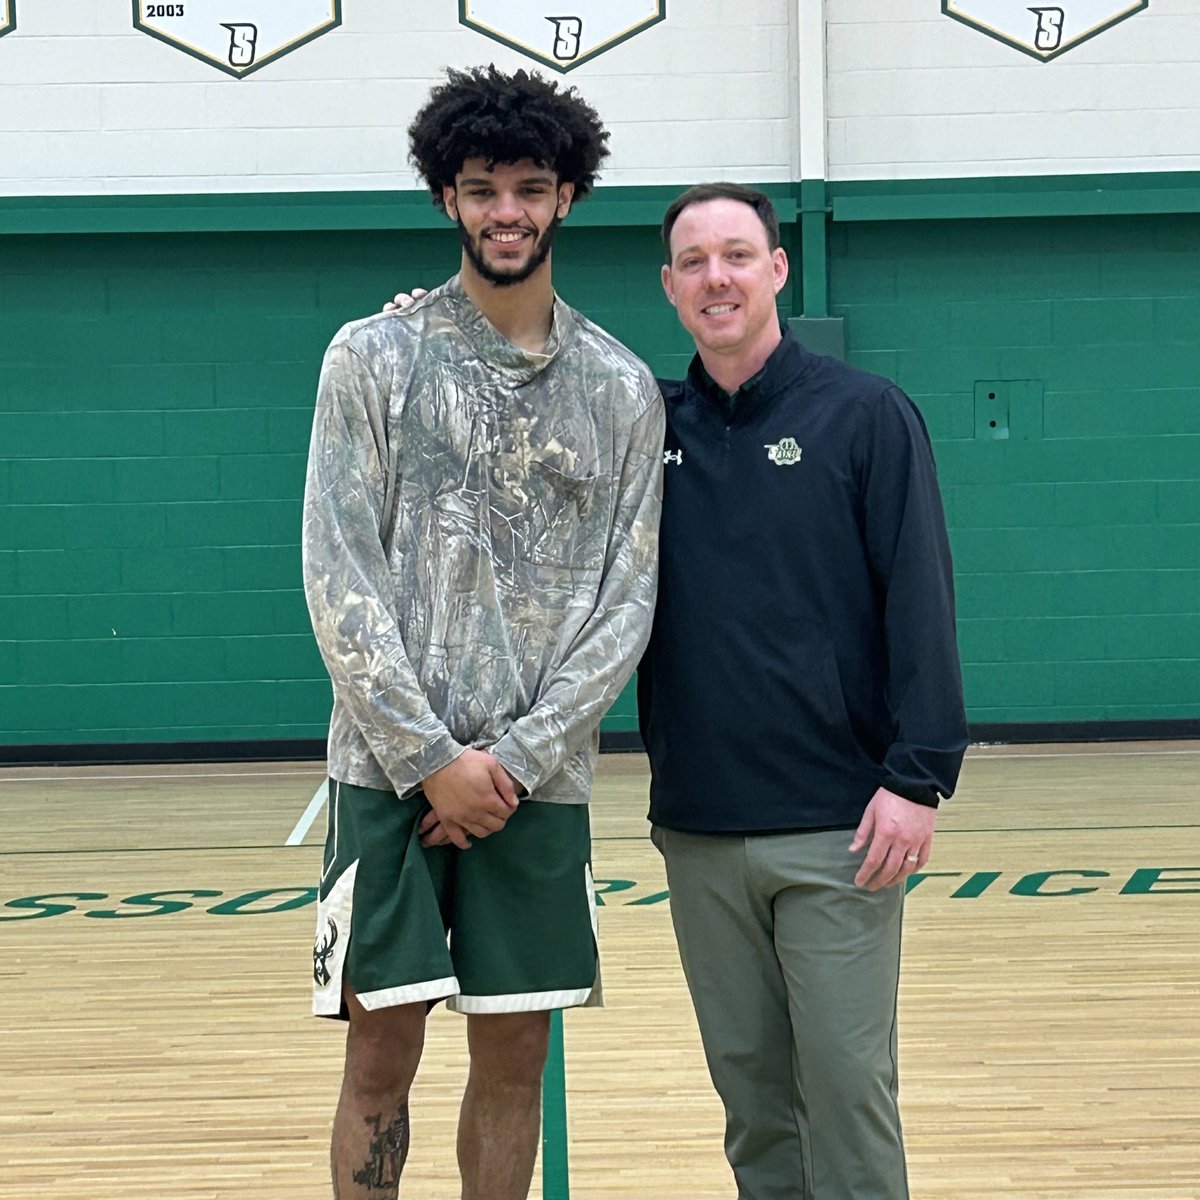 Great to have @Bucks guard @andrejackson111 - brother of recent commit Marcus Jackson - stop by campus today! #MarchOn x #SienaSaints